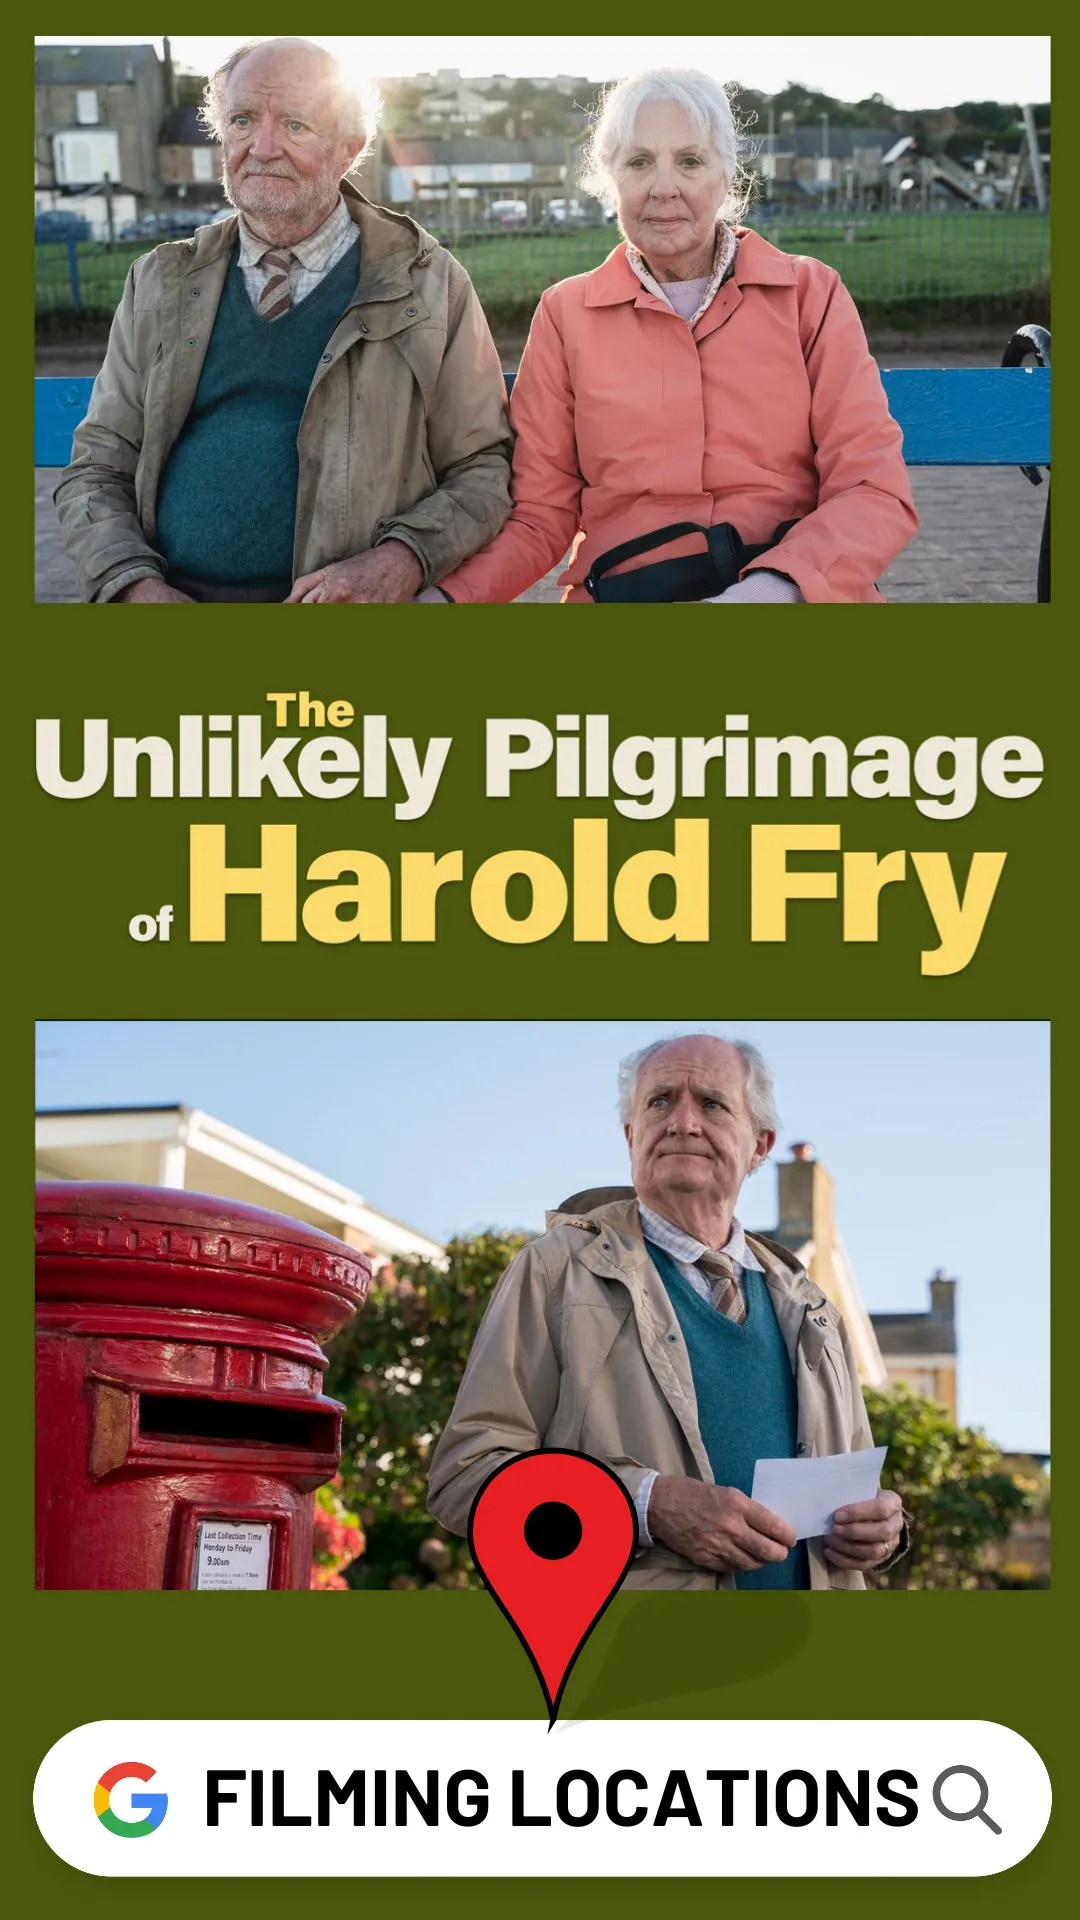 The Unlikely Pilgrimage of Harold Fry Filming Locations